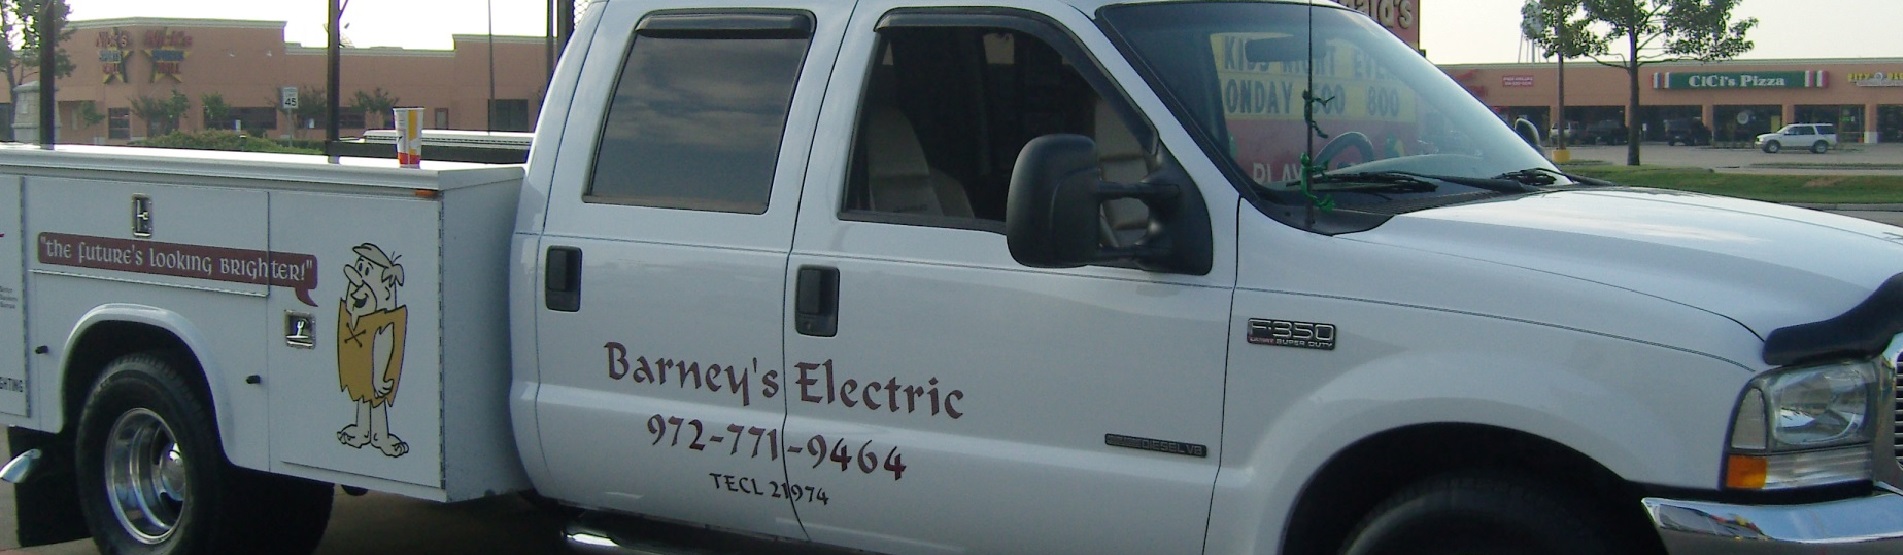 Electrician Wylie TX Barney's Electric Full Service Electrician Residential Commercial Retail and New Construction Wiring Repair Installation Service 24 Hour Emergency Services Master Electrician Rockwall Texas